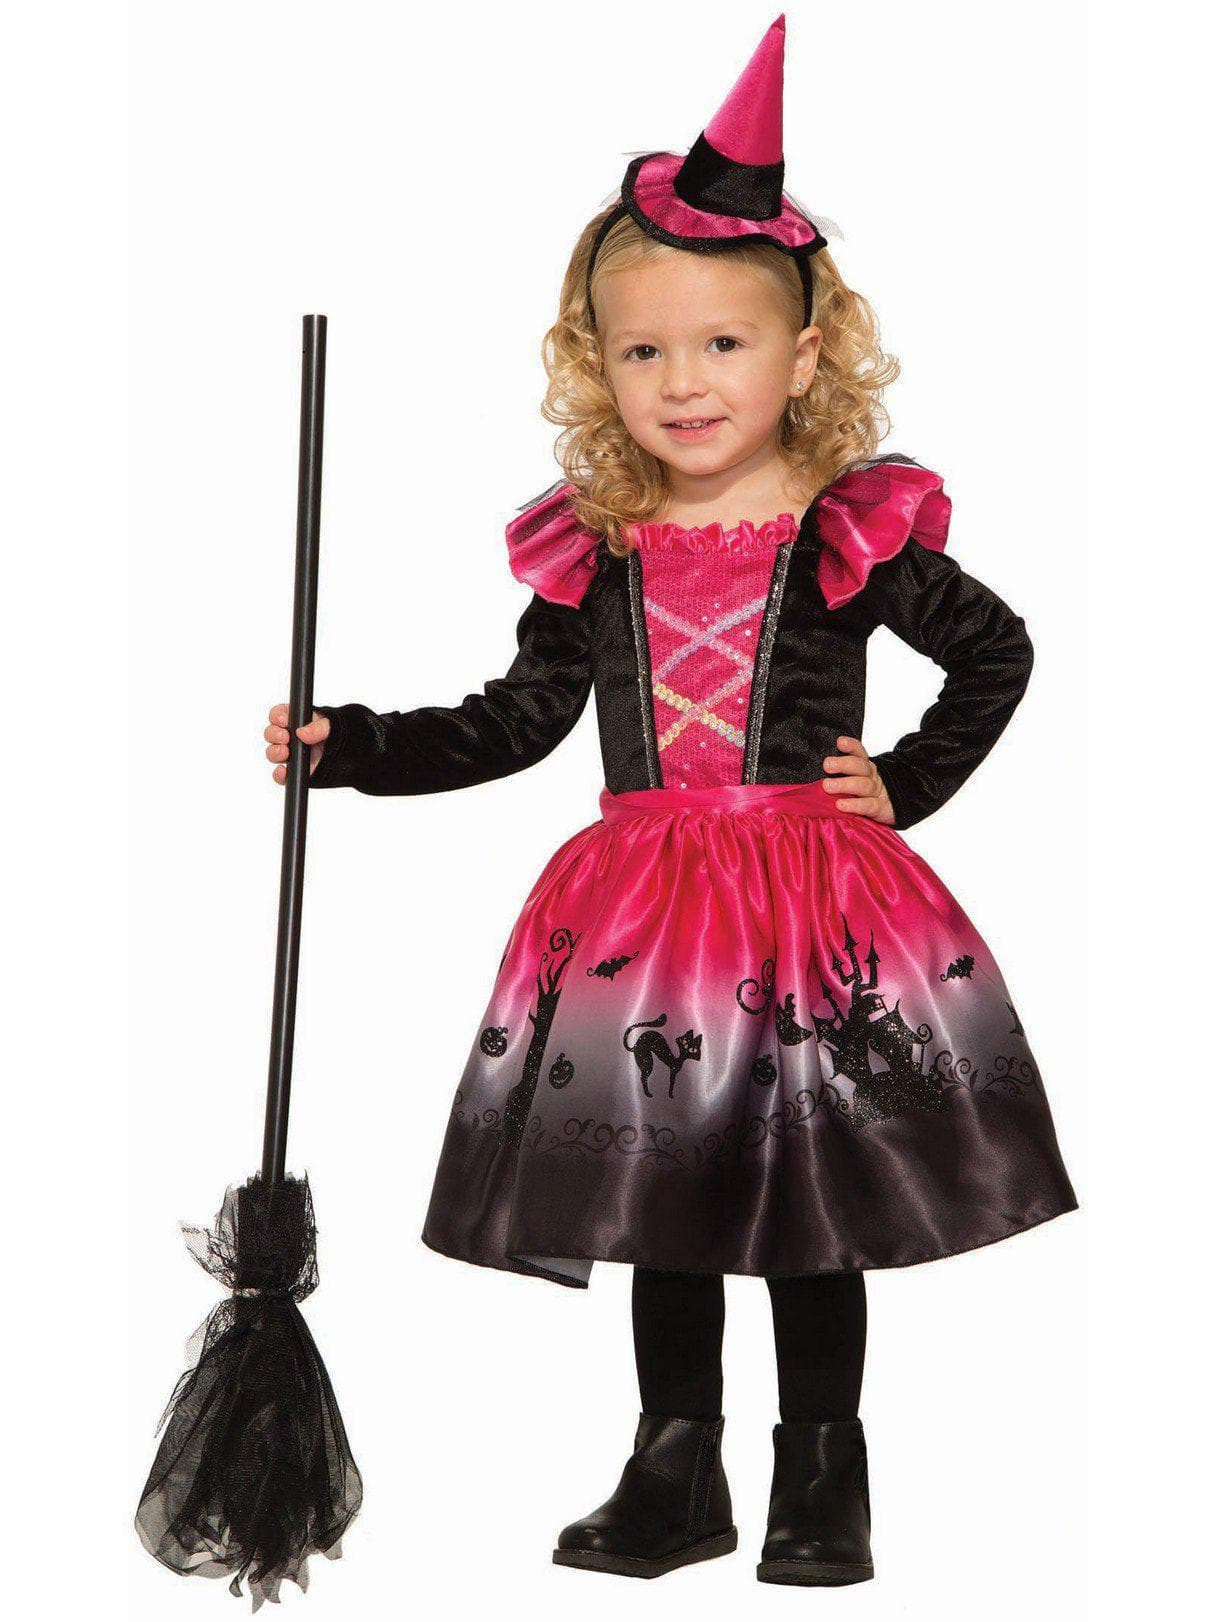 Baby/Toddler Deluxe Spooky Witch Costume - costumes.com